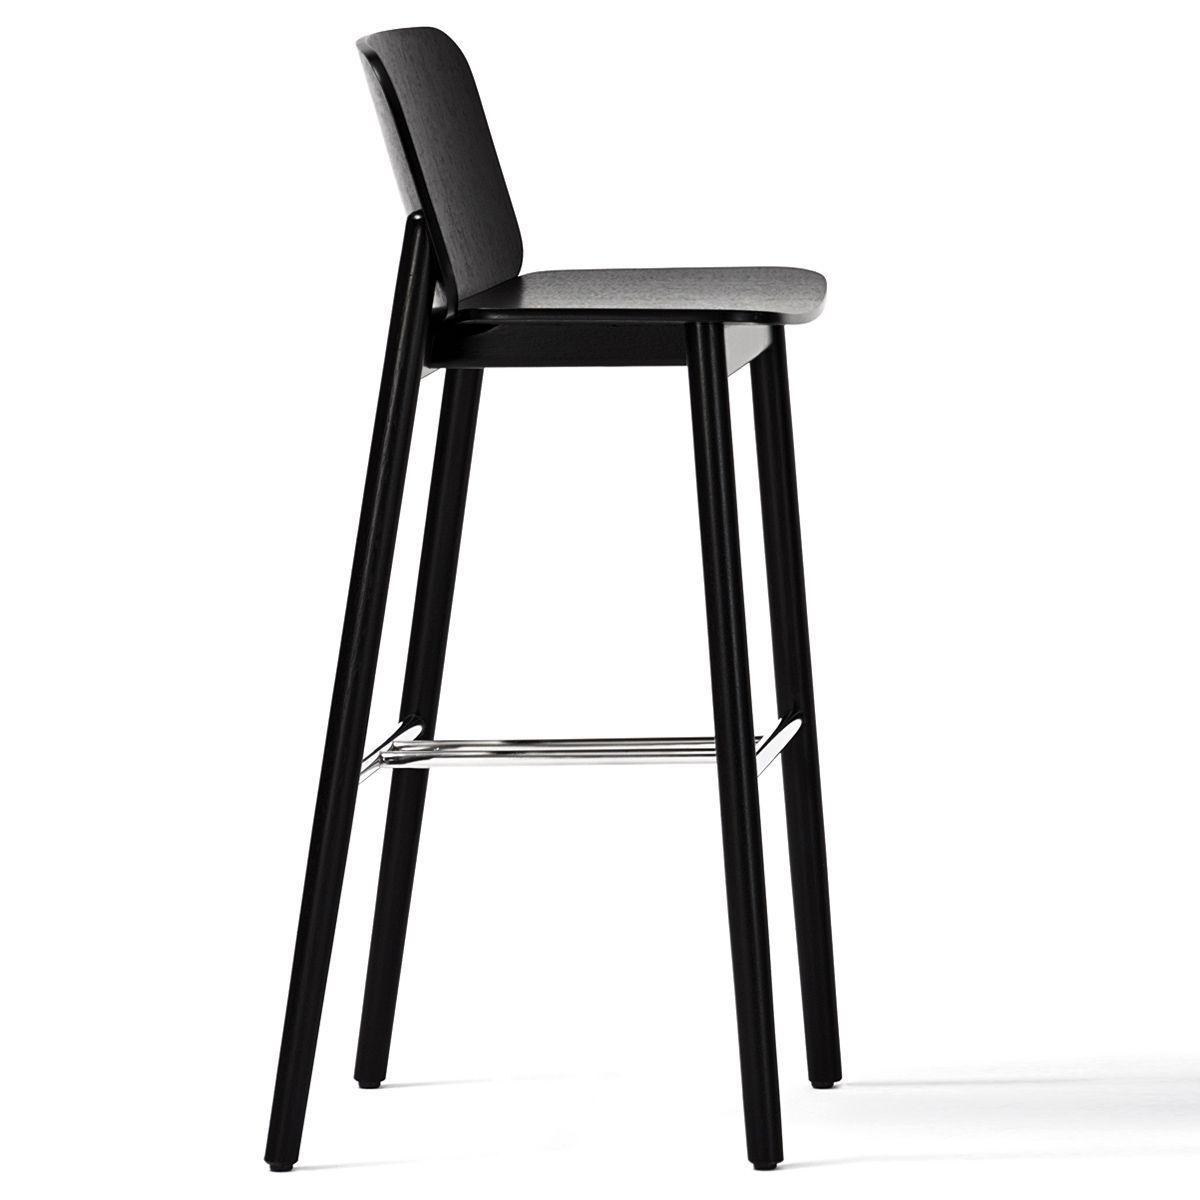 Bar stool H-4390 PROP by Paged